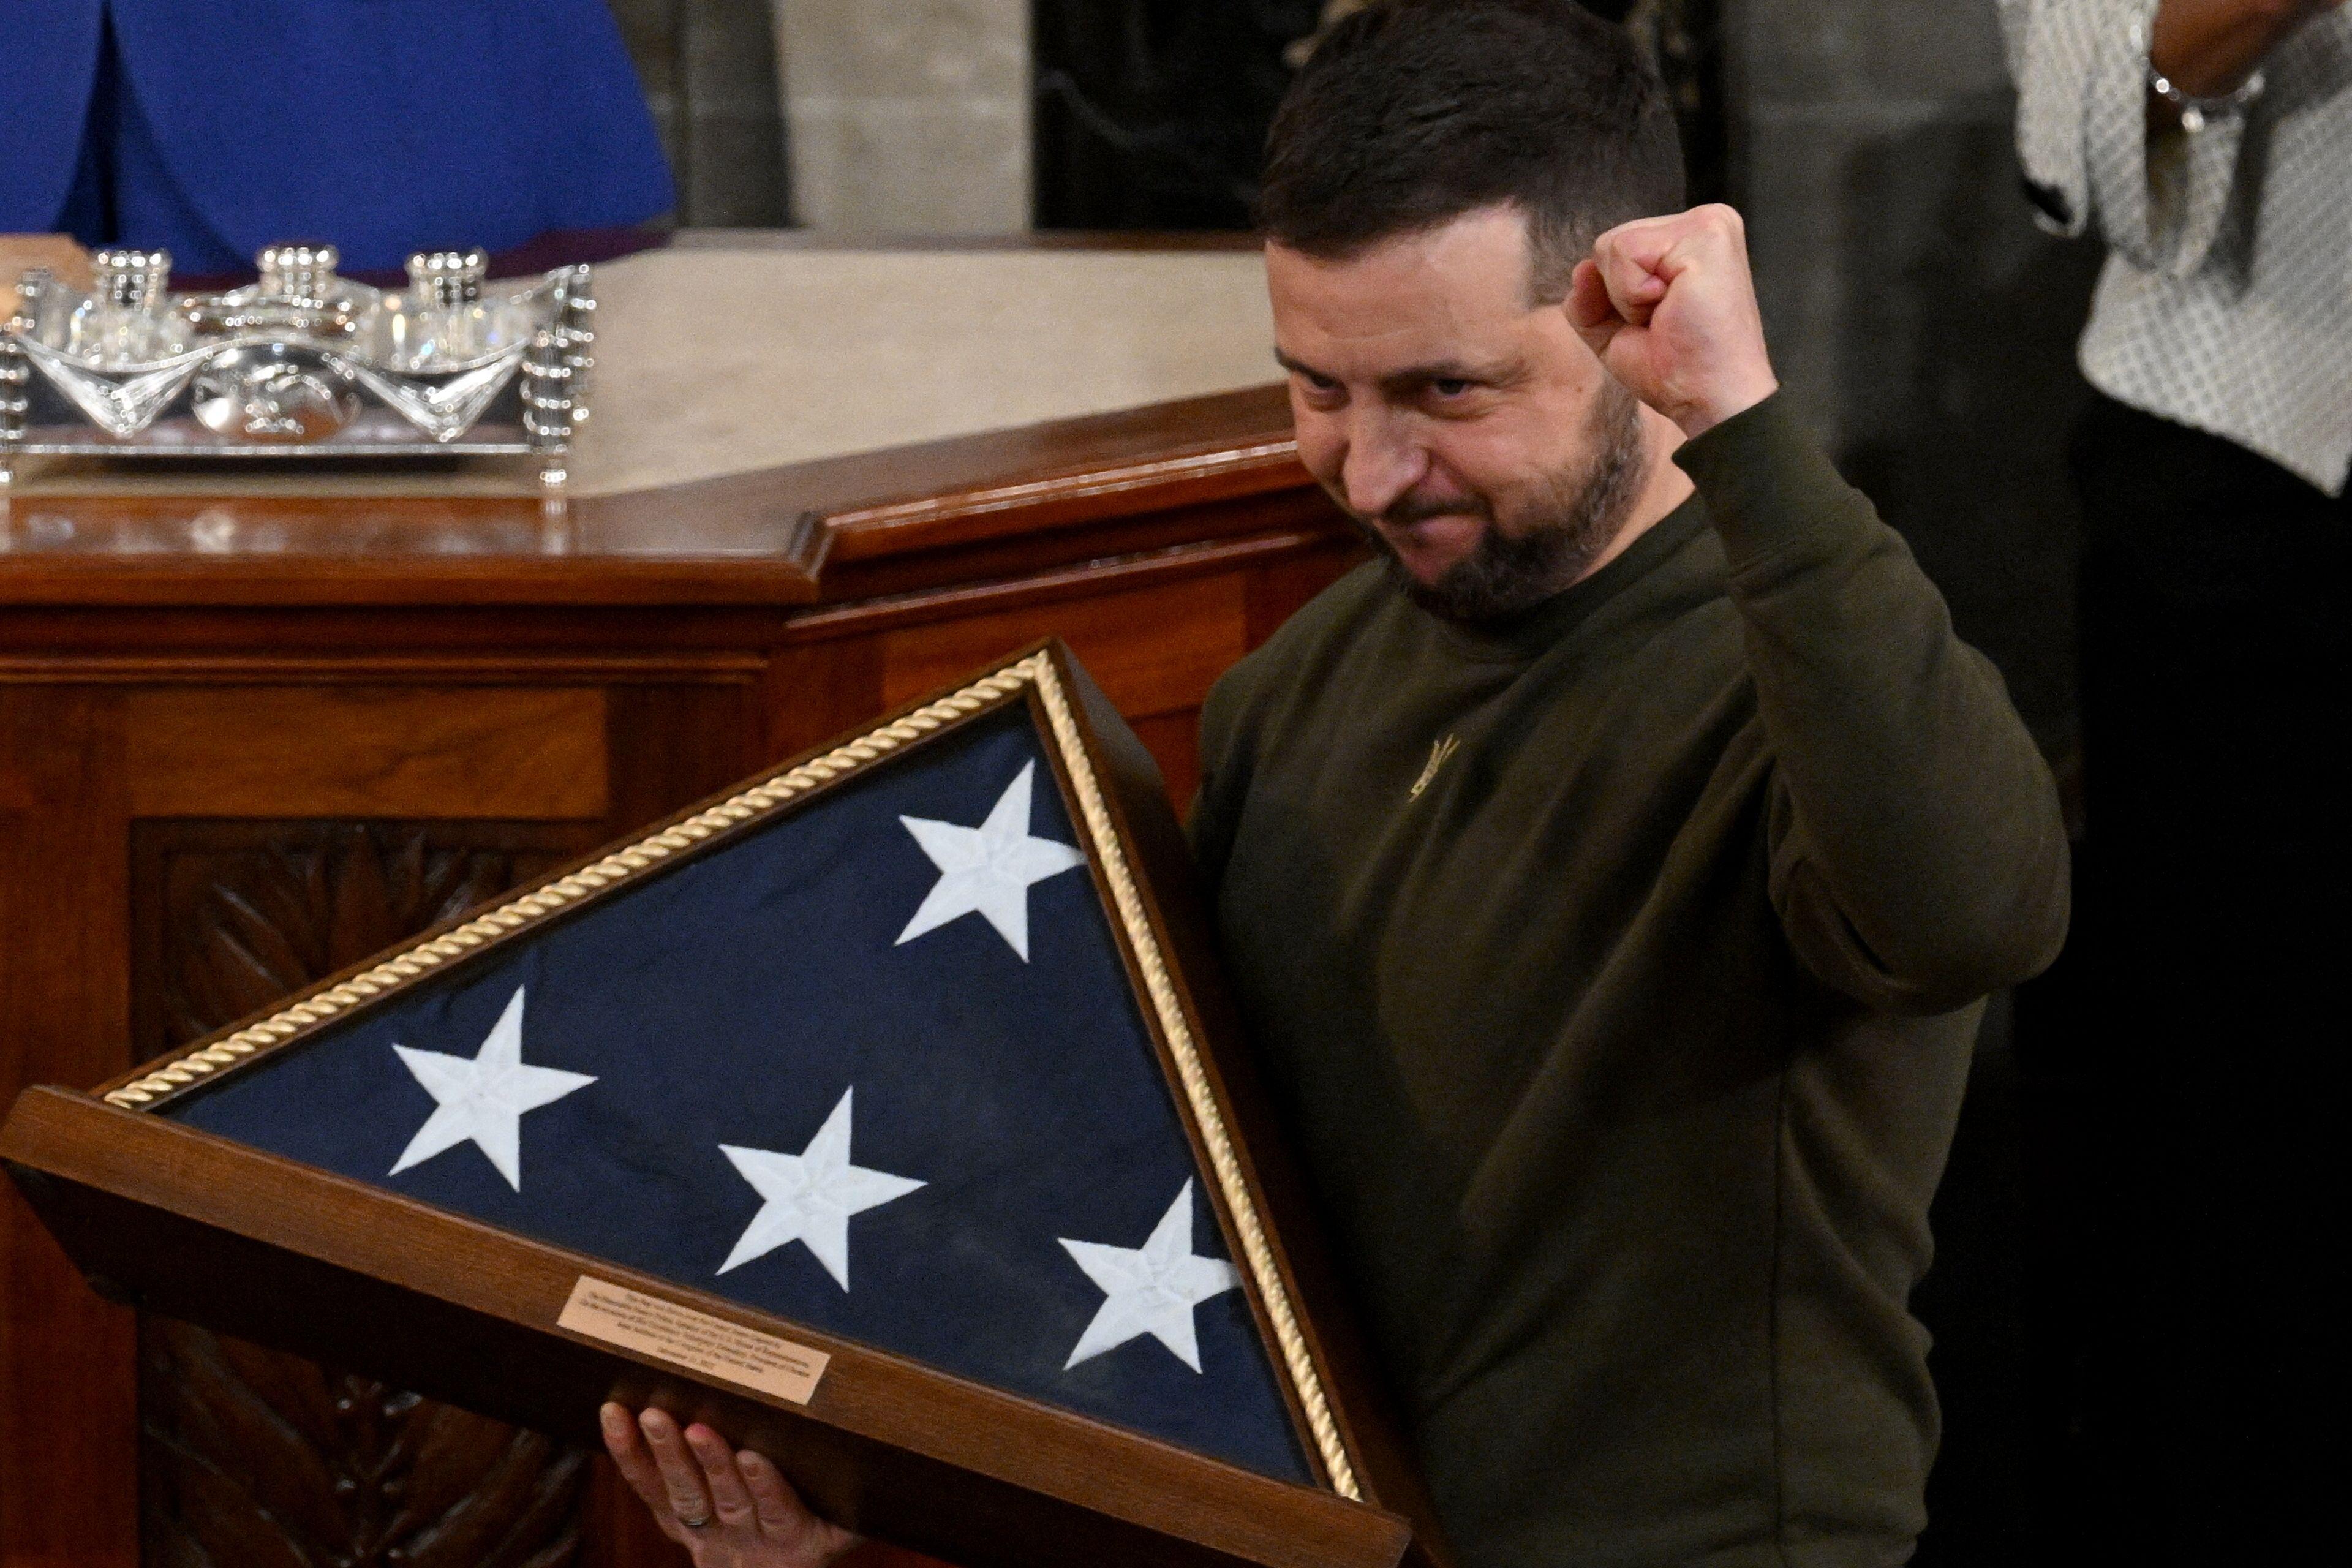 Ukraine's President Volodymyr Zelensky pumps his fist as he holds up a US national flag he received from US House Speaker Nancy Pelosi during a speech in the Congressional chamber.